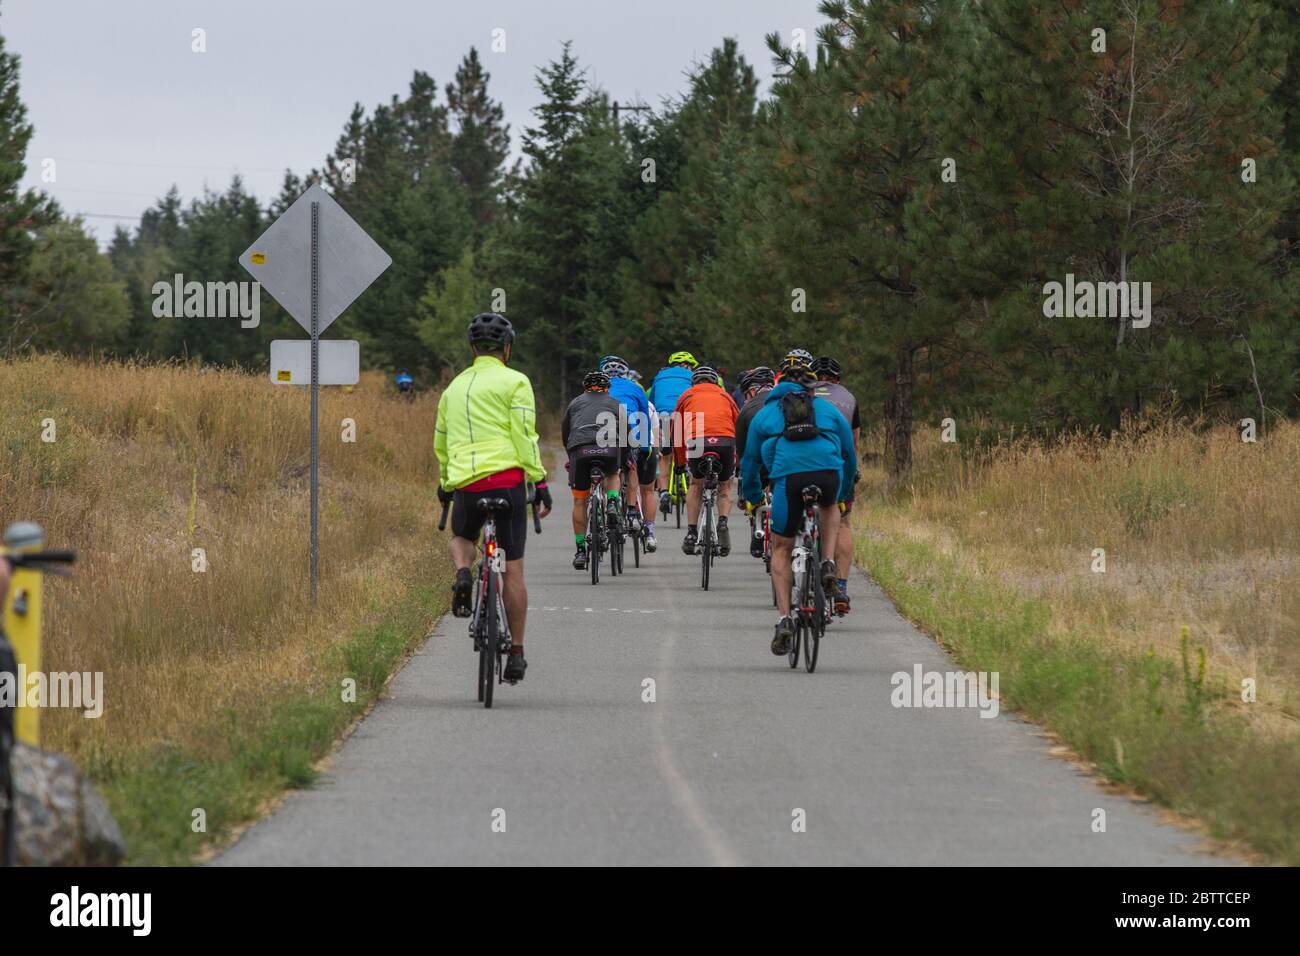 Scenic Bike Race, large group, in full racing gear and uniform. Outdoor scenic background Stock Photo